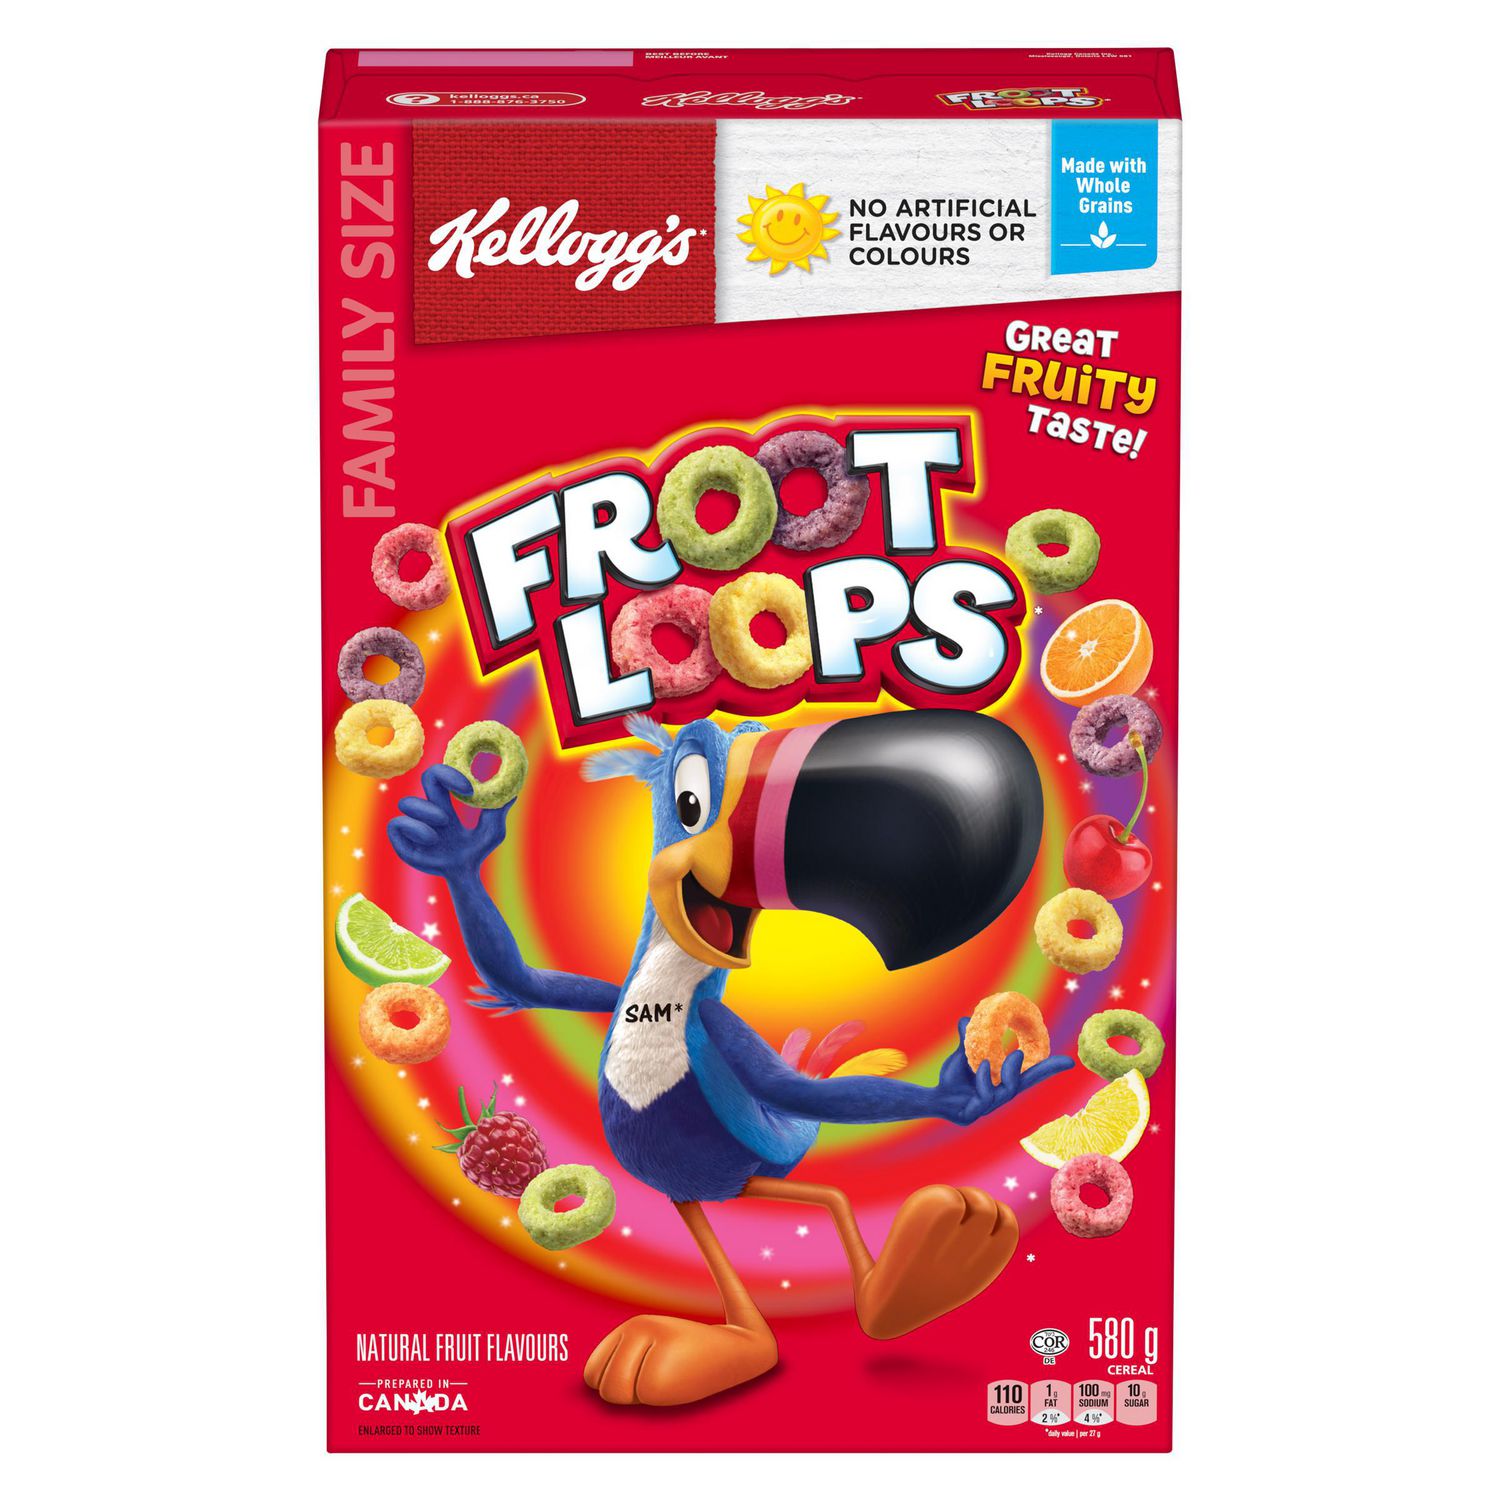 Kellogg's Froot Loops Cereal, Family Size, 580g | Walmart Canada